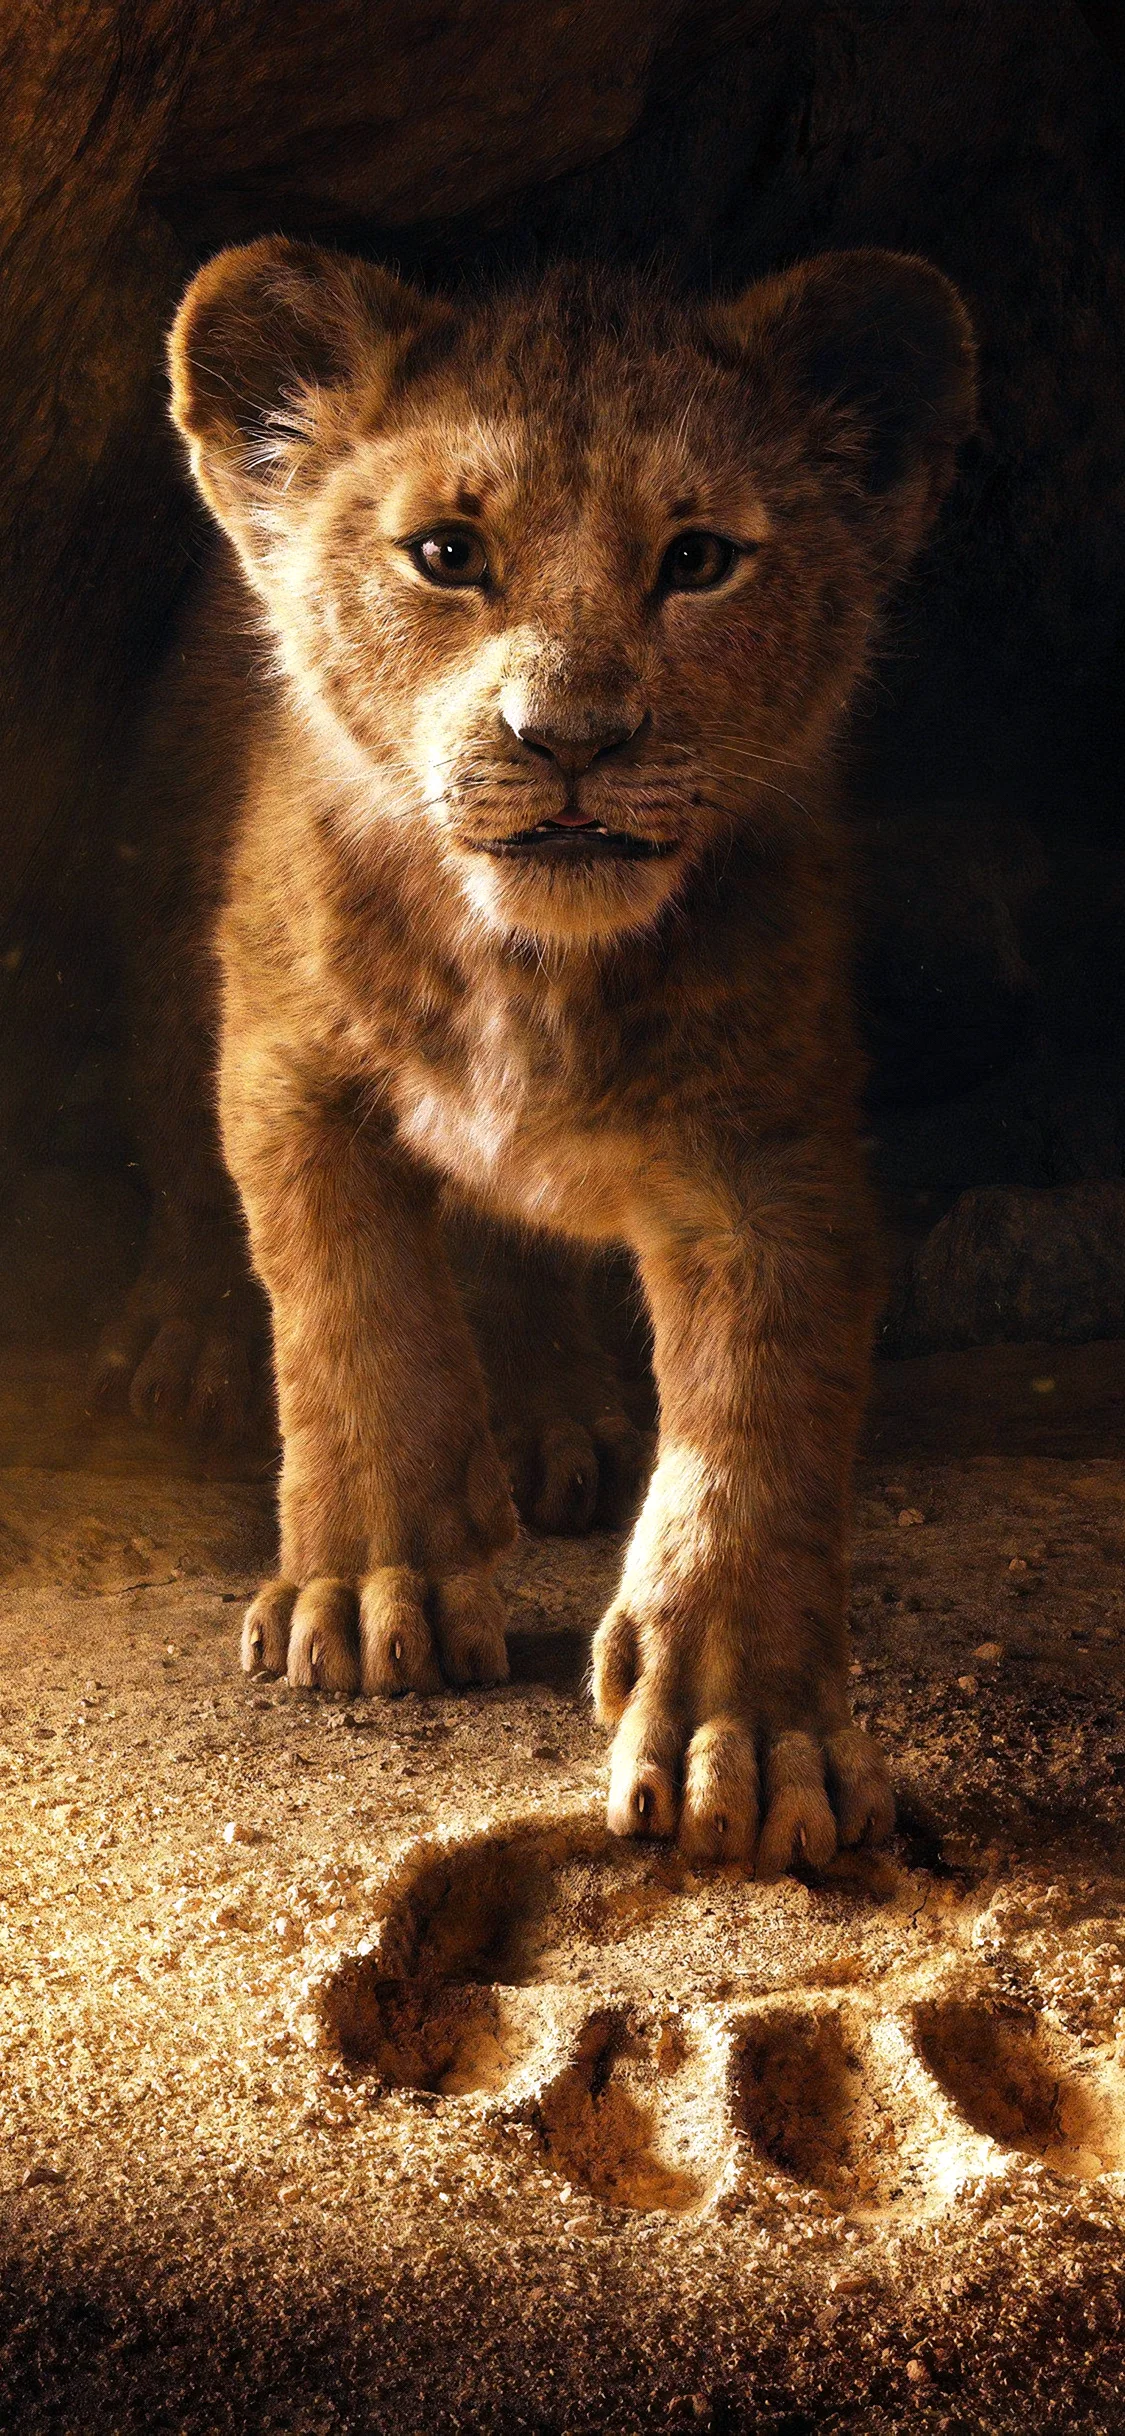 The Lion King 2019 Wallpaper for iPhone 11 Pro